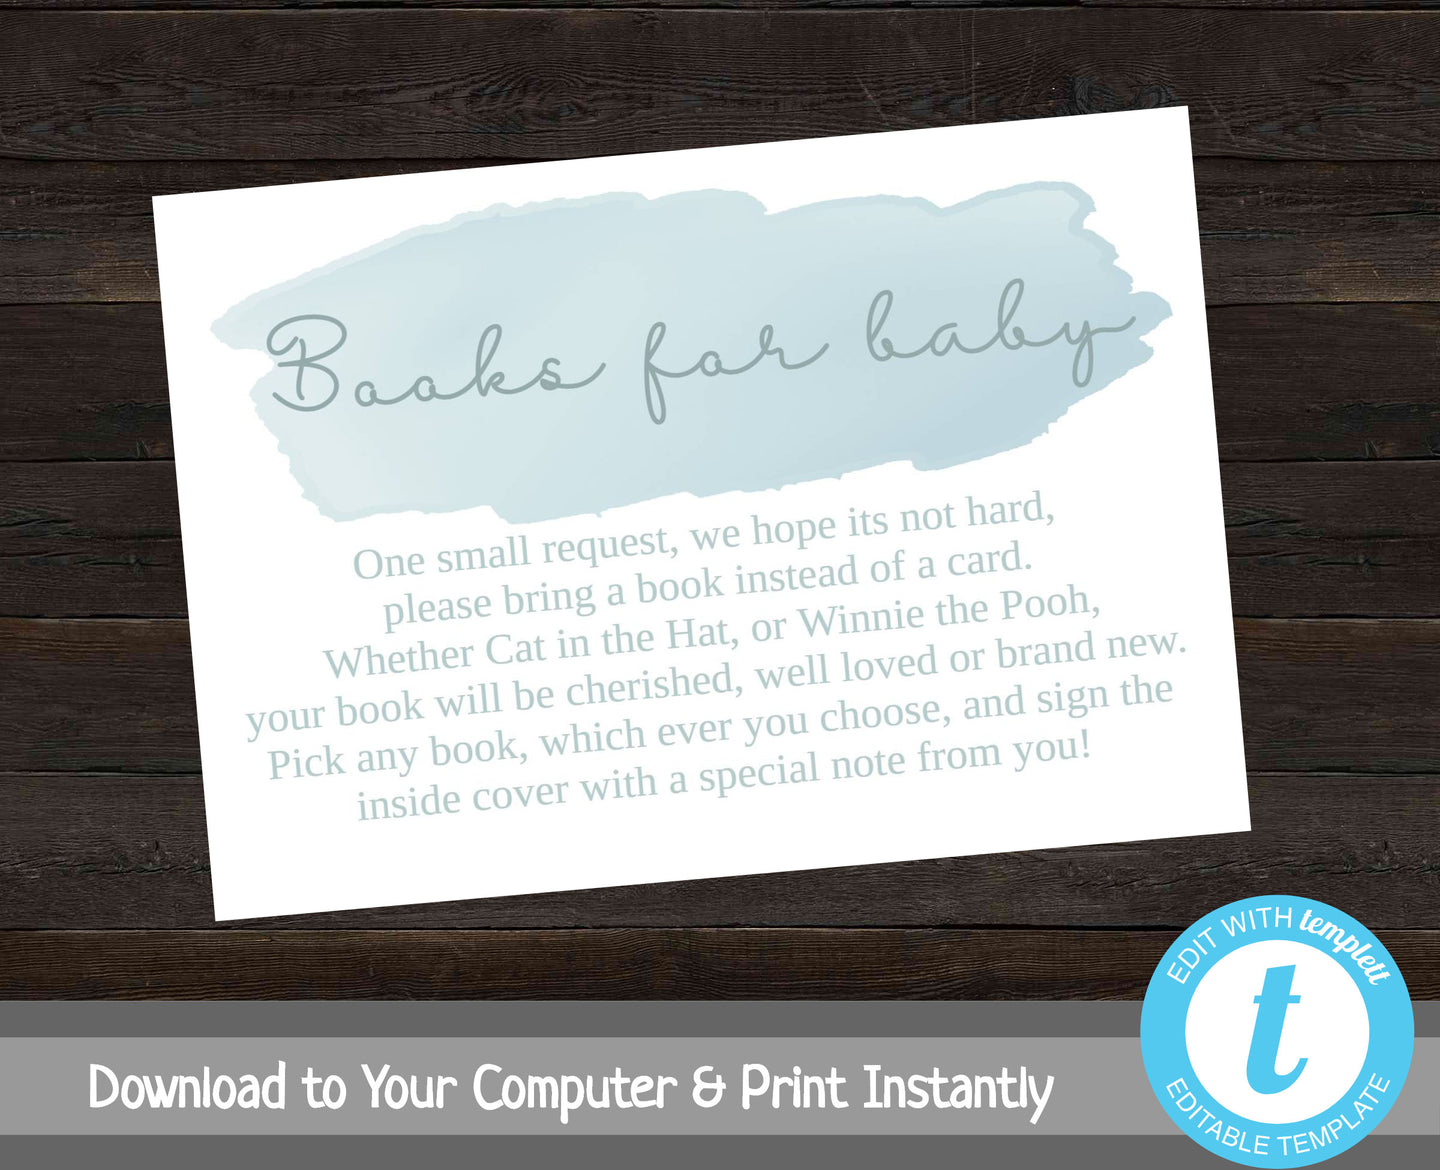 Book Request Printable, Books for Baby Insert Card, Baby Shower Invitation Insert, Stock the Library, Bring a Book, Instant Download, Blue